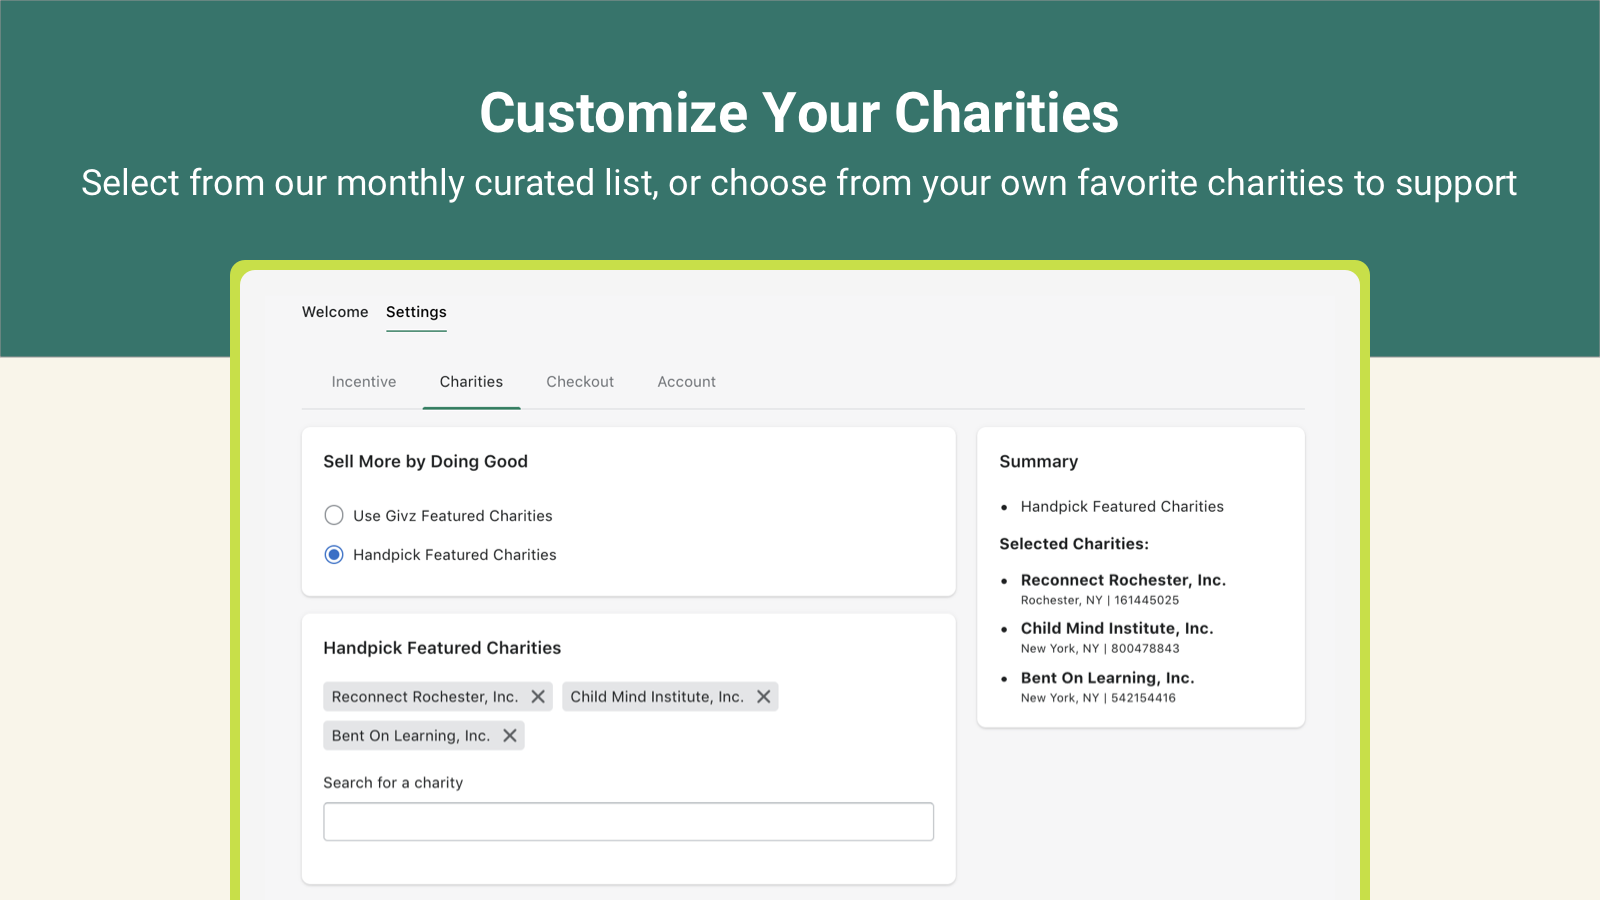 Choose the causes from our curated list or add your own